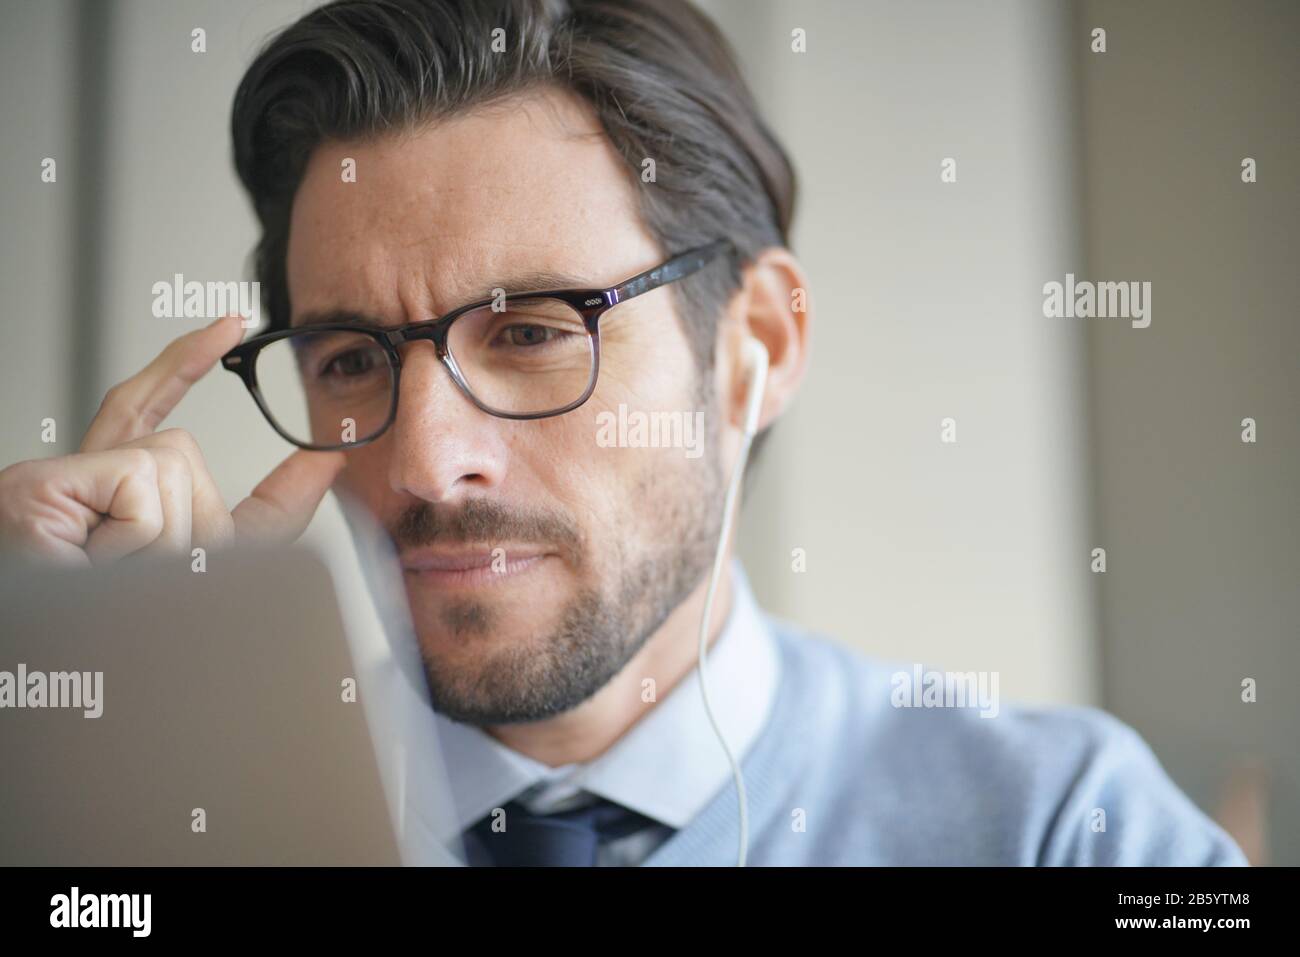 Portrait of attractive man working on laptop wearing glasses Stock Photo -  Alamy